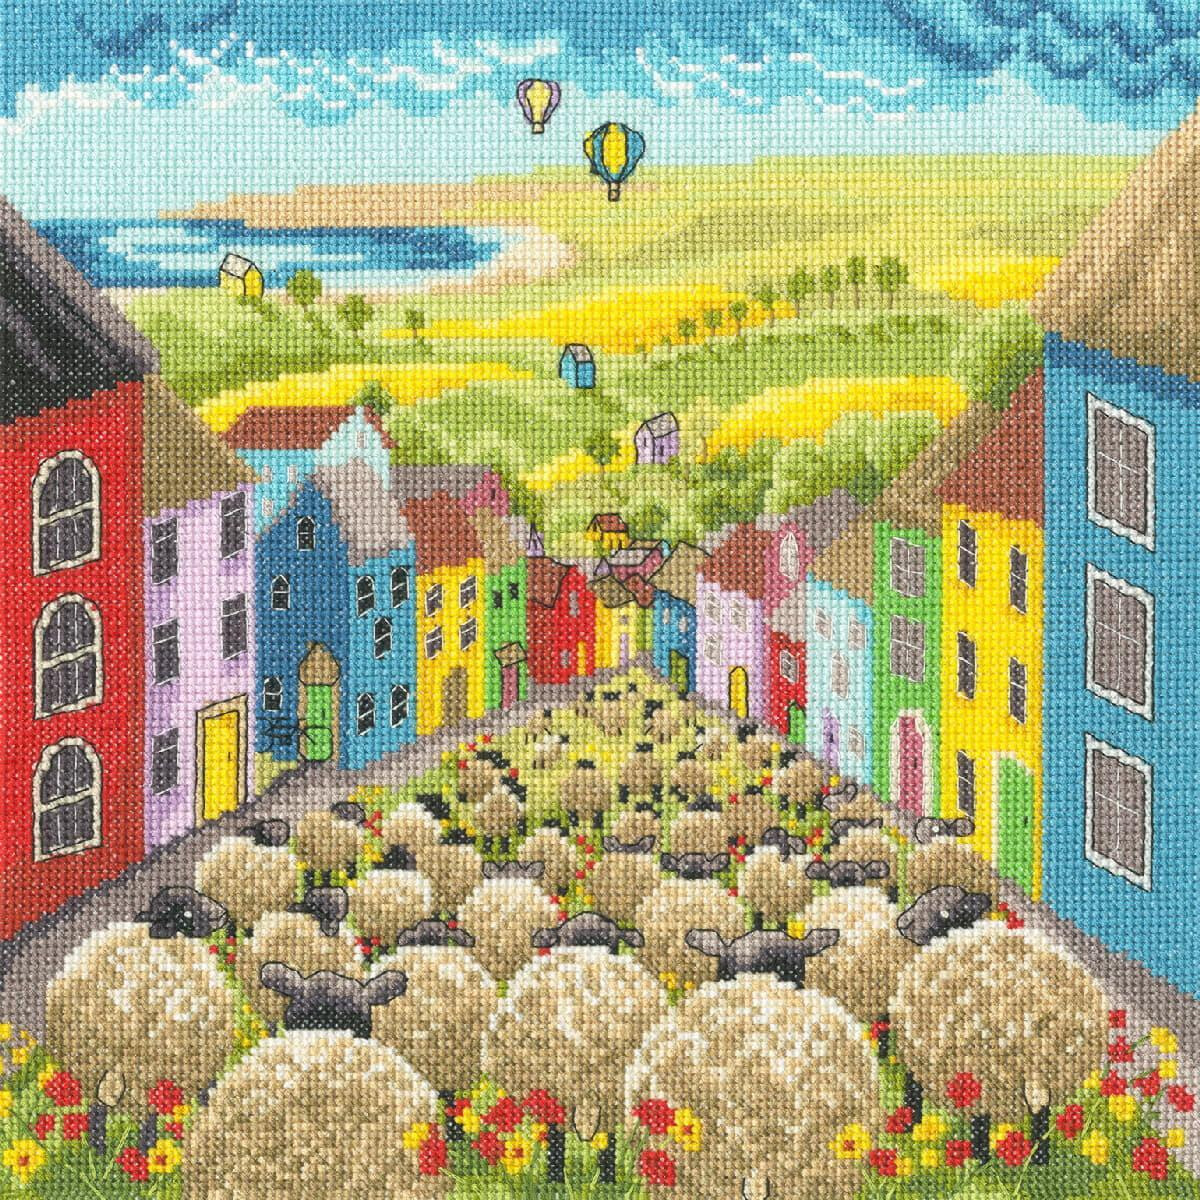 Bothy Threads counted cross stitch kit "Wool Meet...